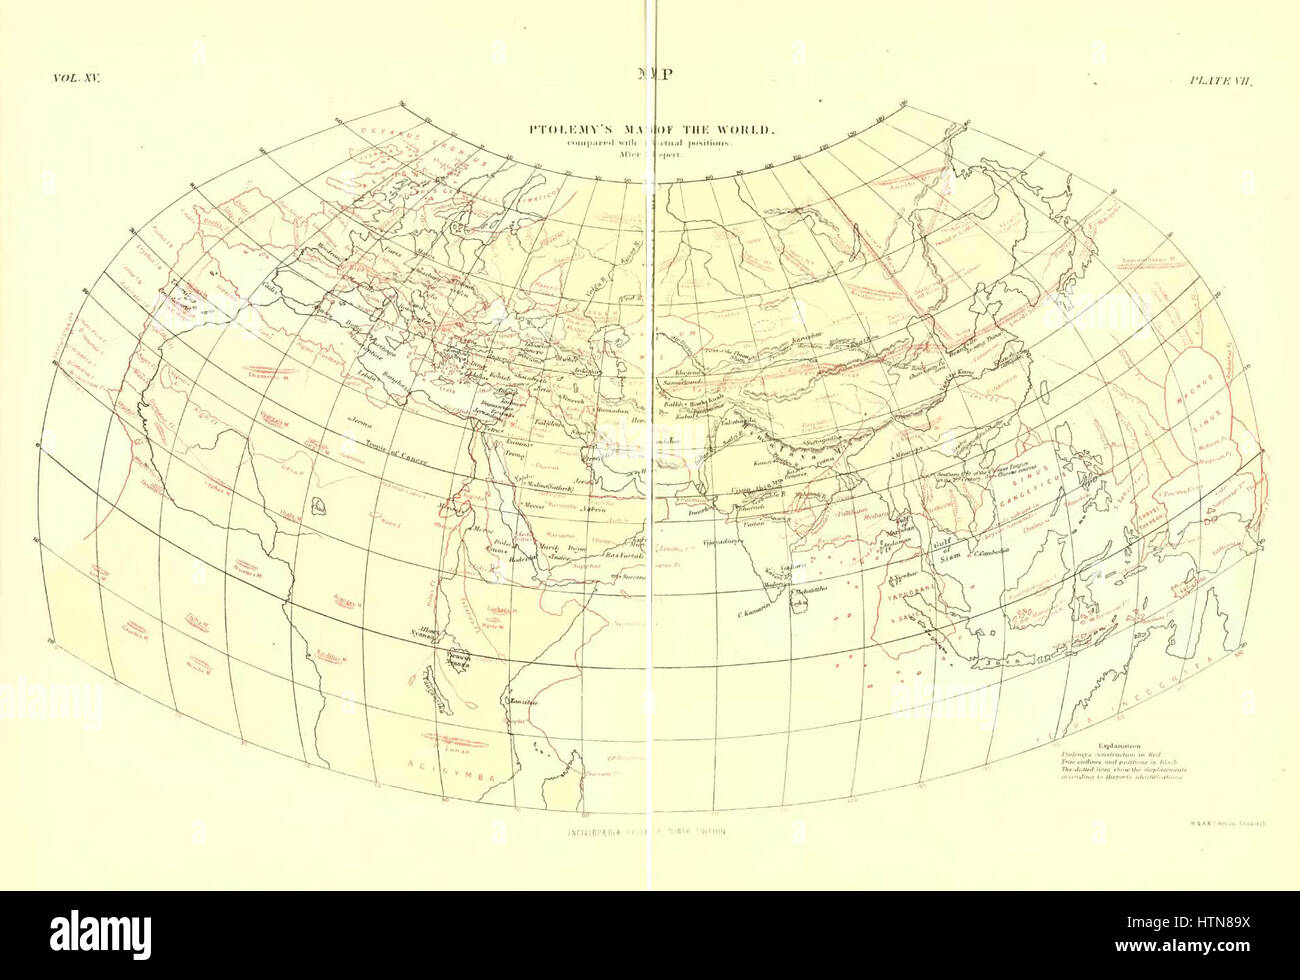 EB9 Vol XV Pl VII Ptolemy's Map of the World Stock Photo